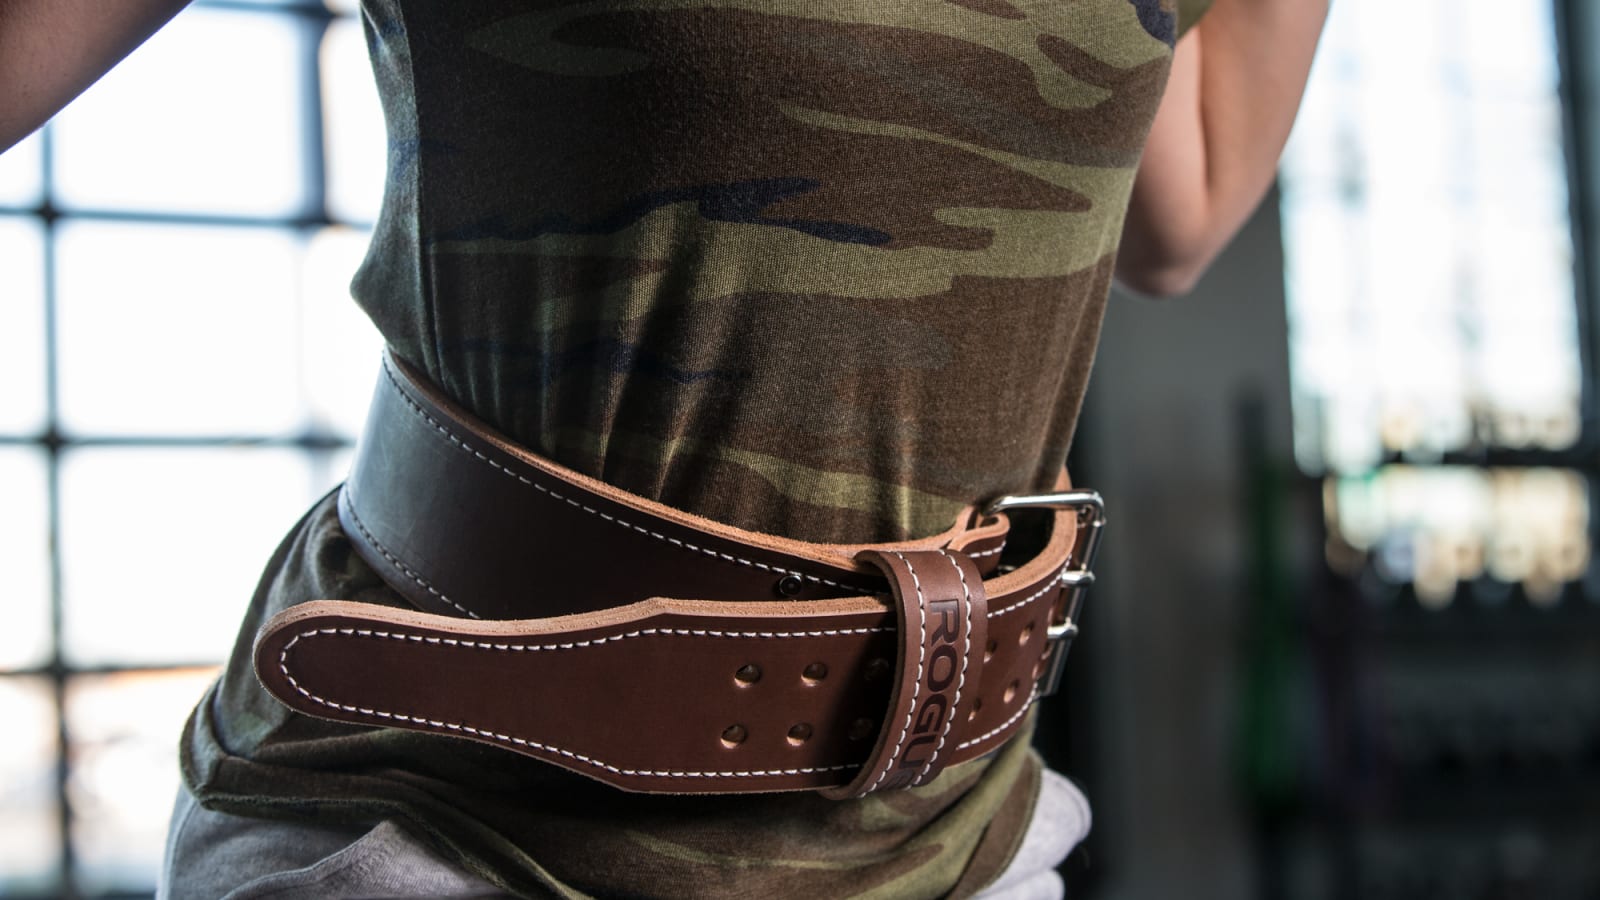 Rogue Ohio Lifting Belt - Weightlifting - Vegetable Tanned Leather